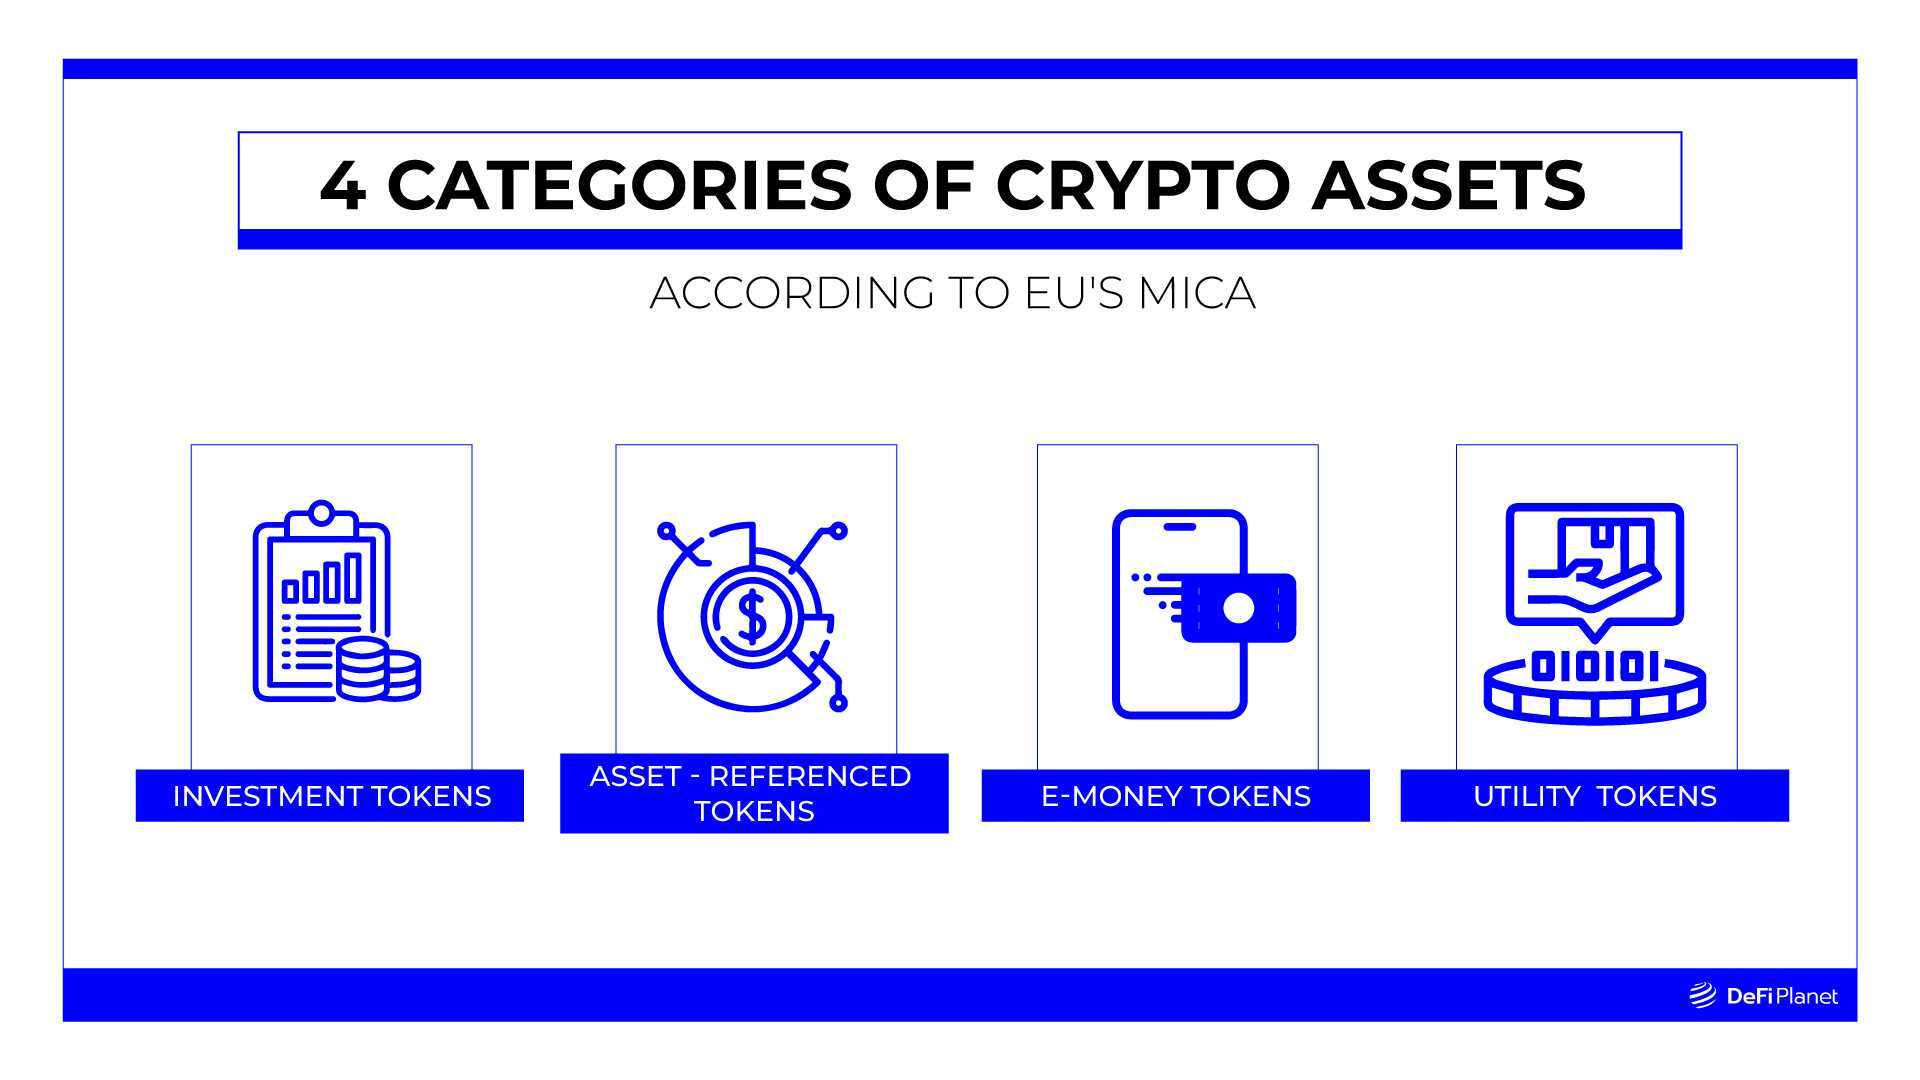 Image of categories of Crypto assets on DeFi Planet